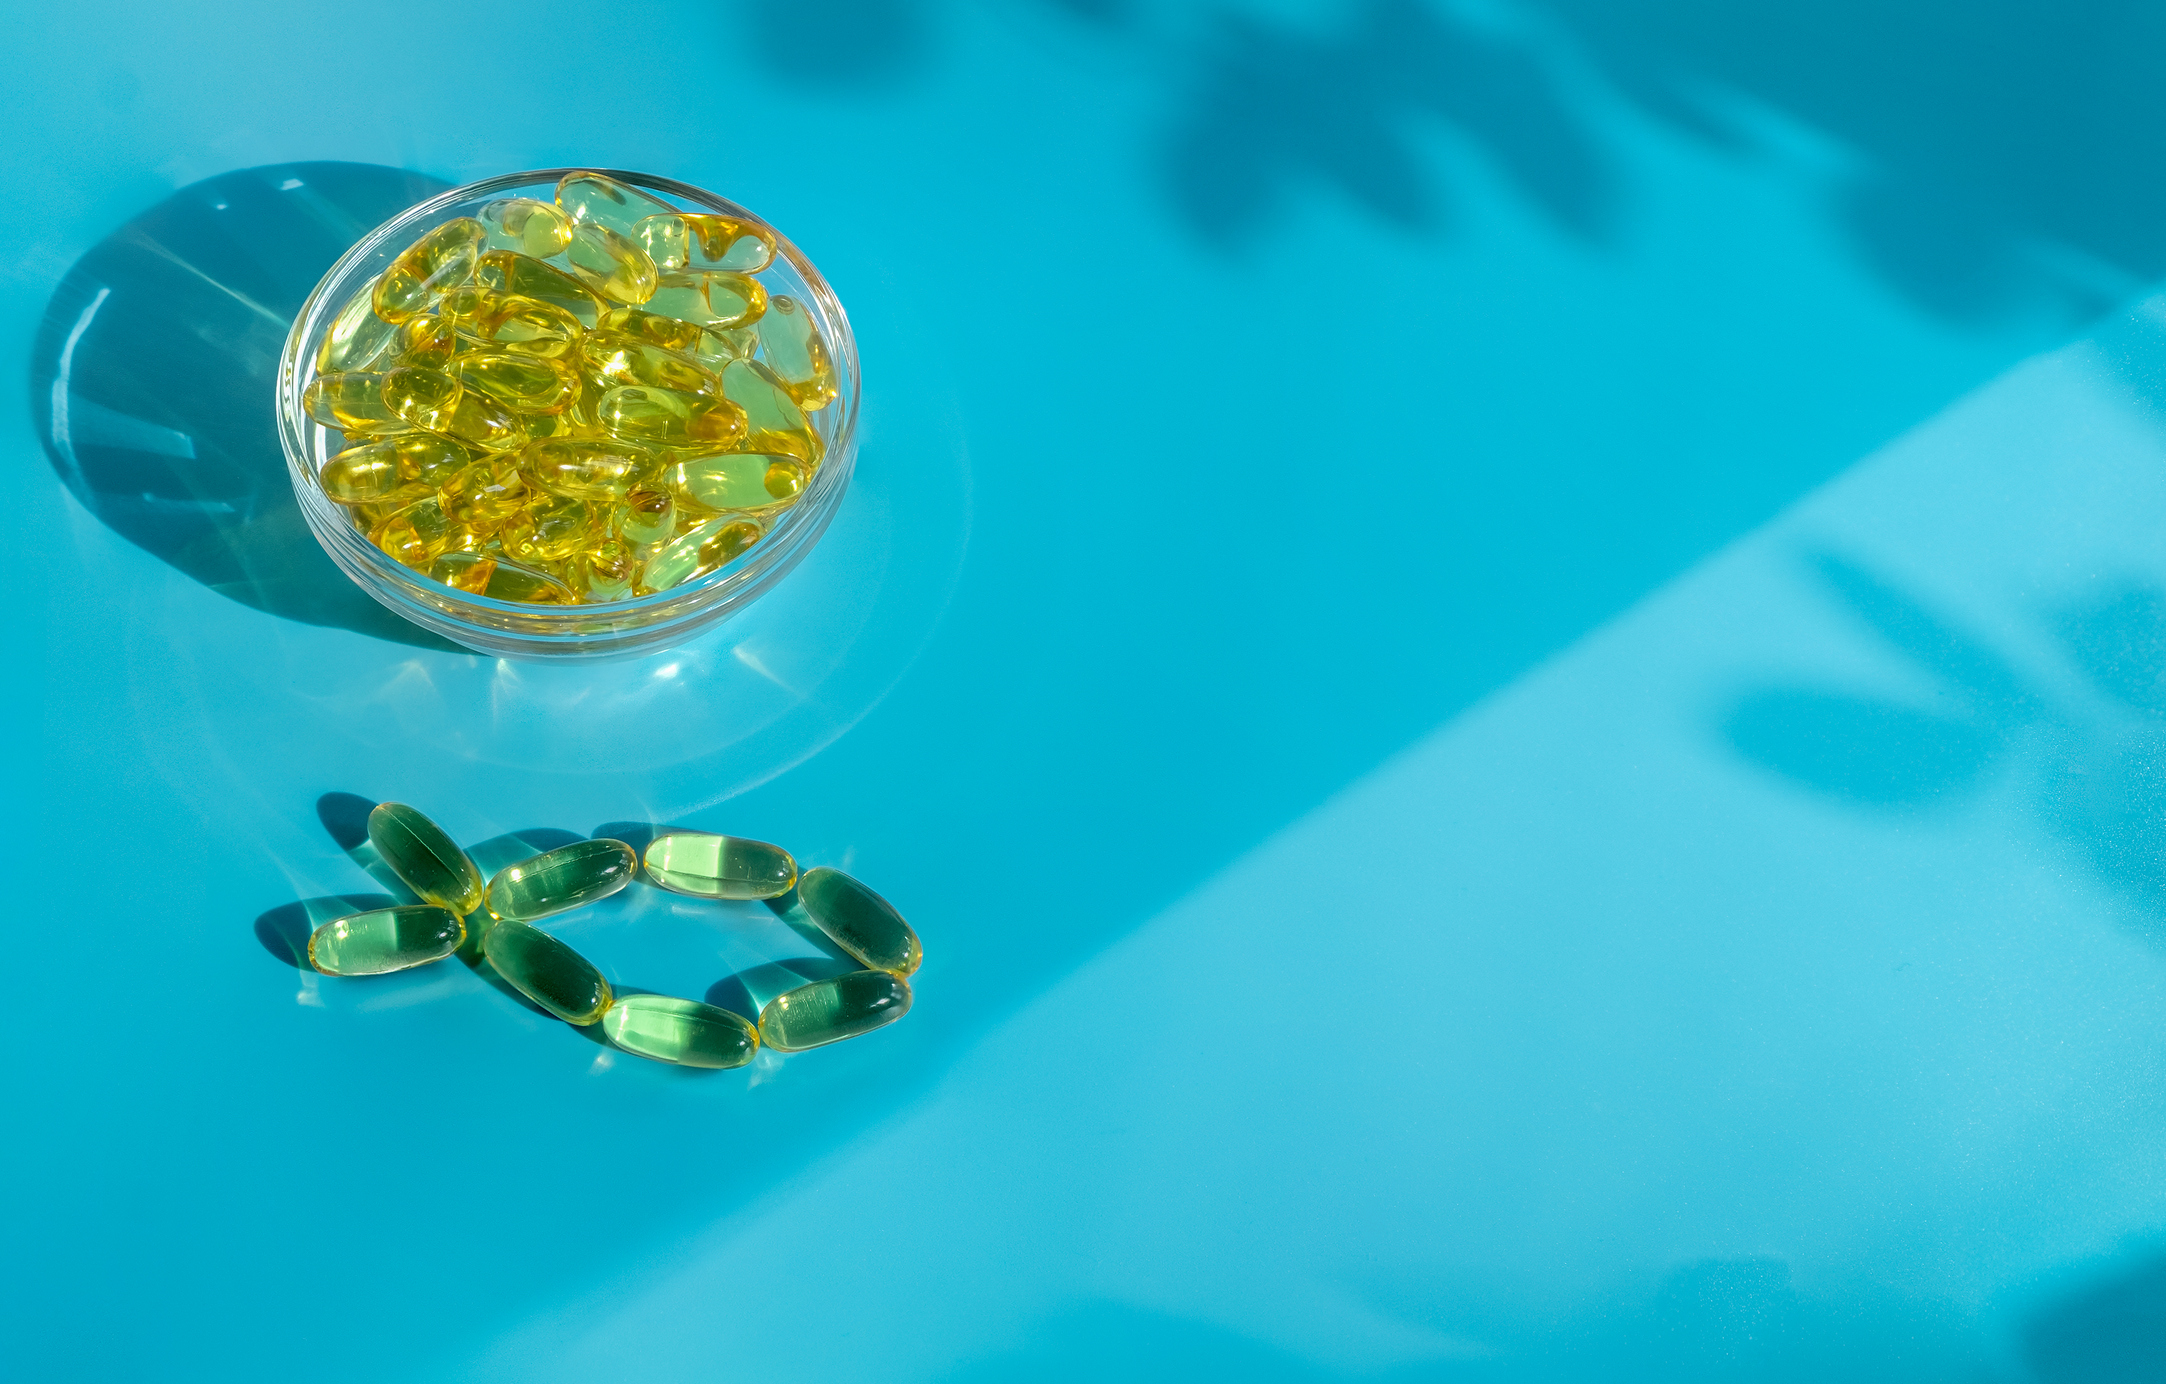 The evidence stacks up: Omega-3s promote heart health